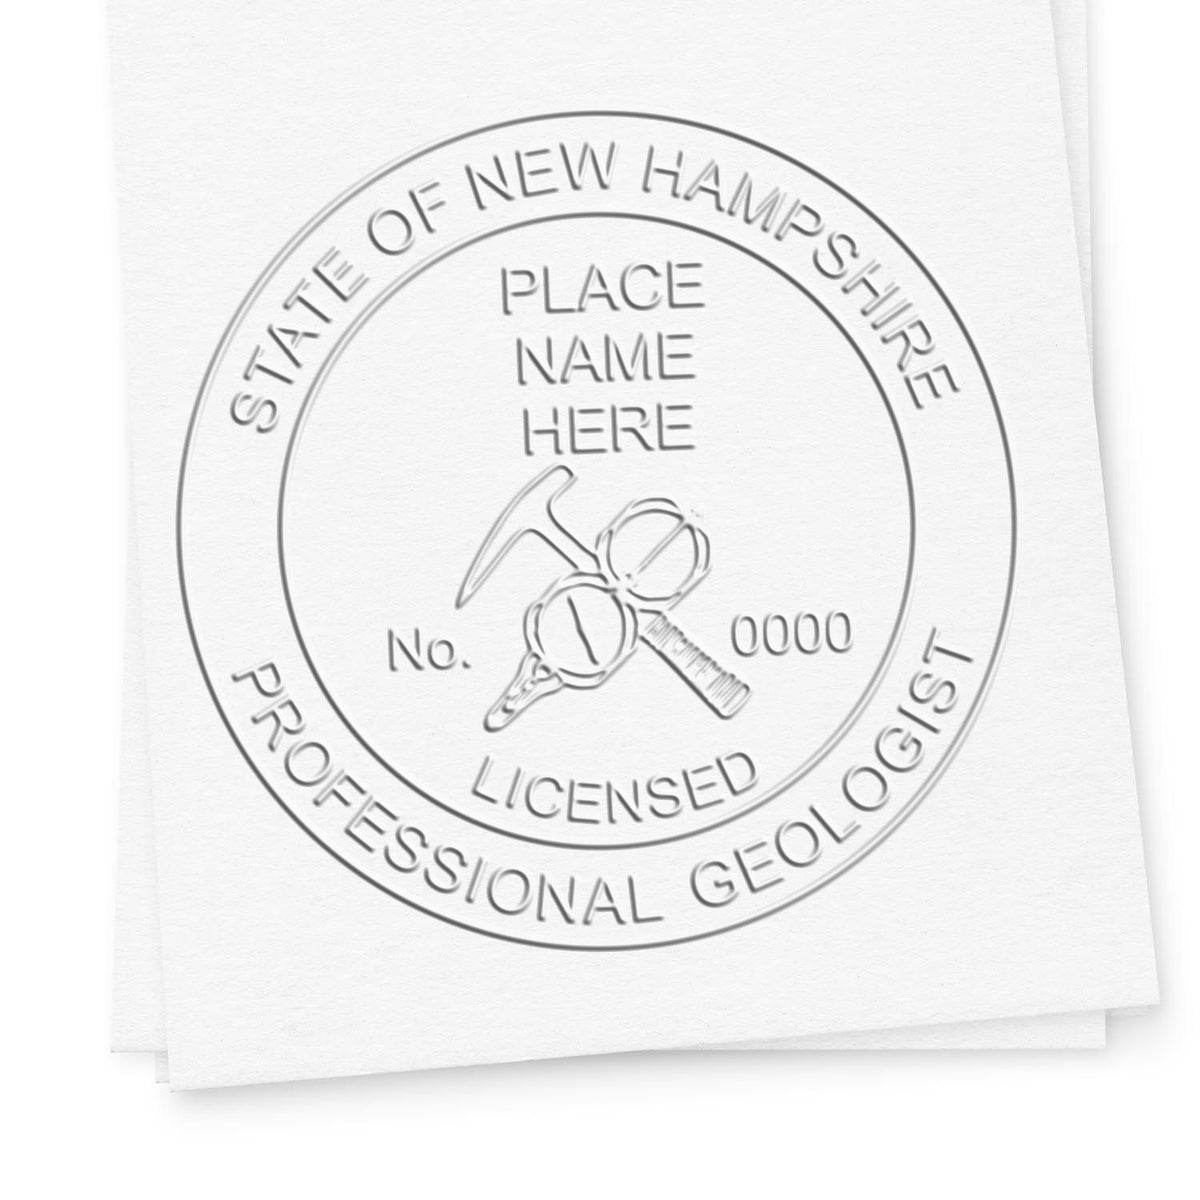 An alternative view of the Soft New Hampshire Professional Geologist Seal stamped on a sheet of paper showing the image in use